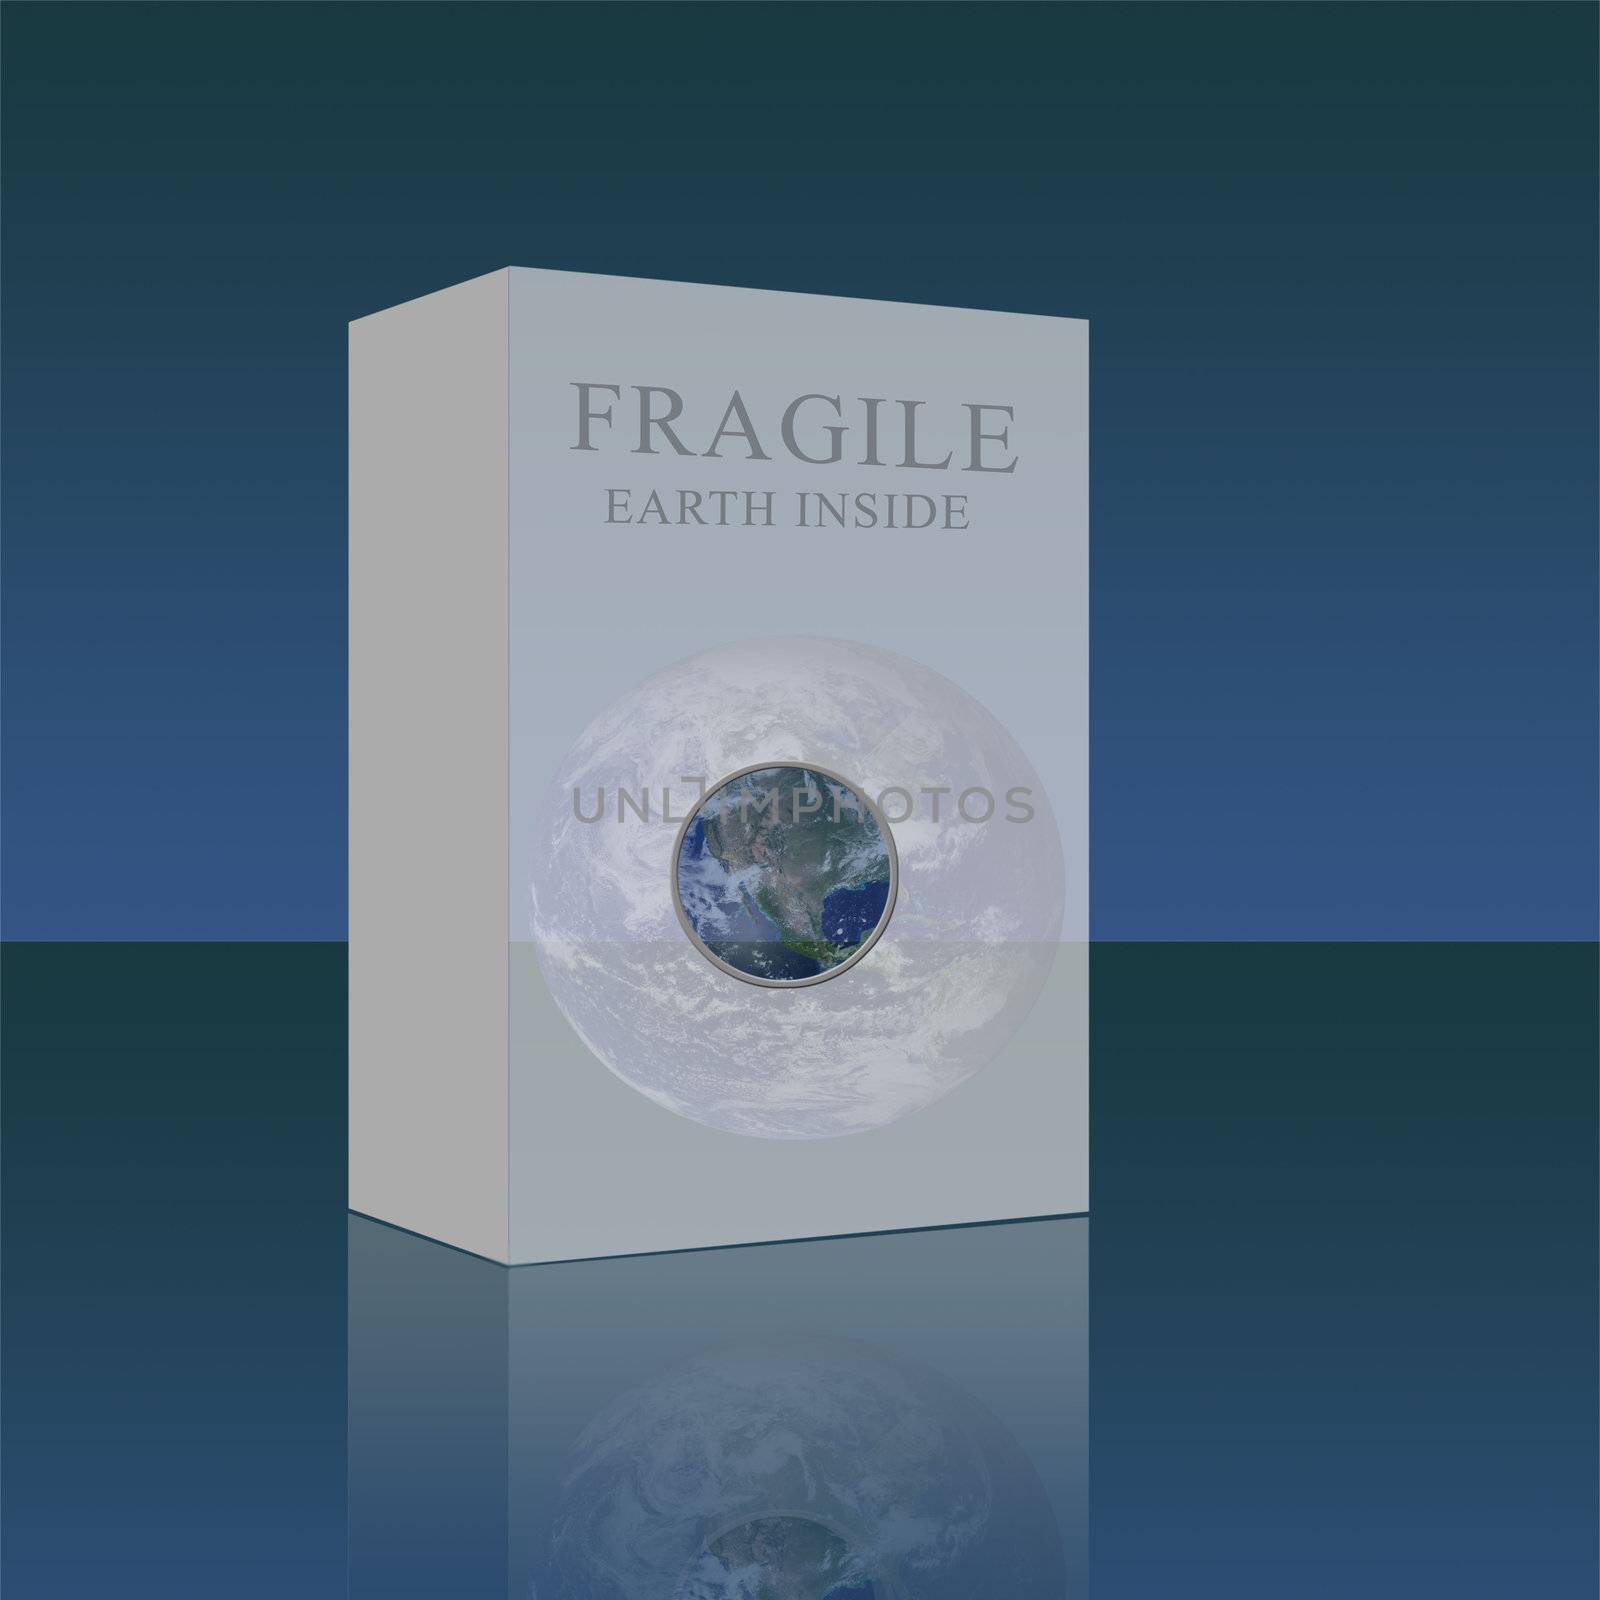 Fragile Earth Handle With Care by sacatani